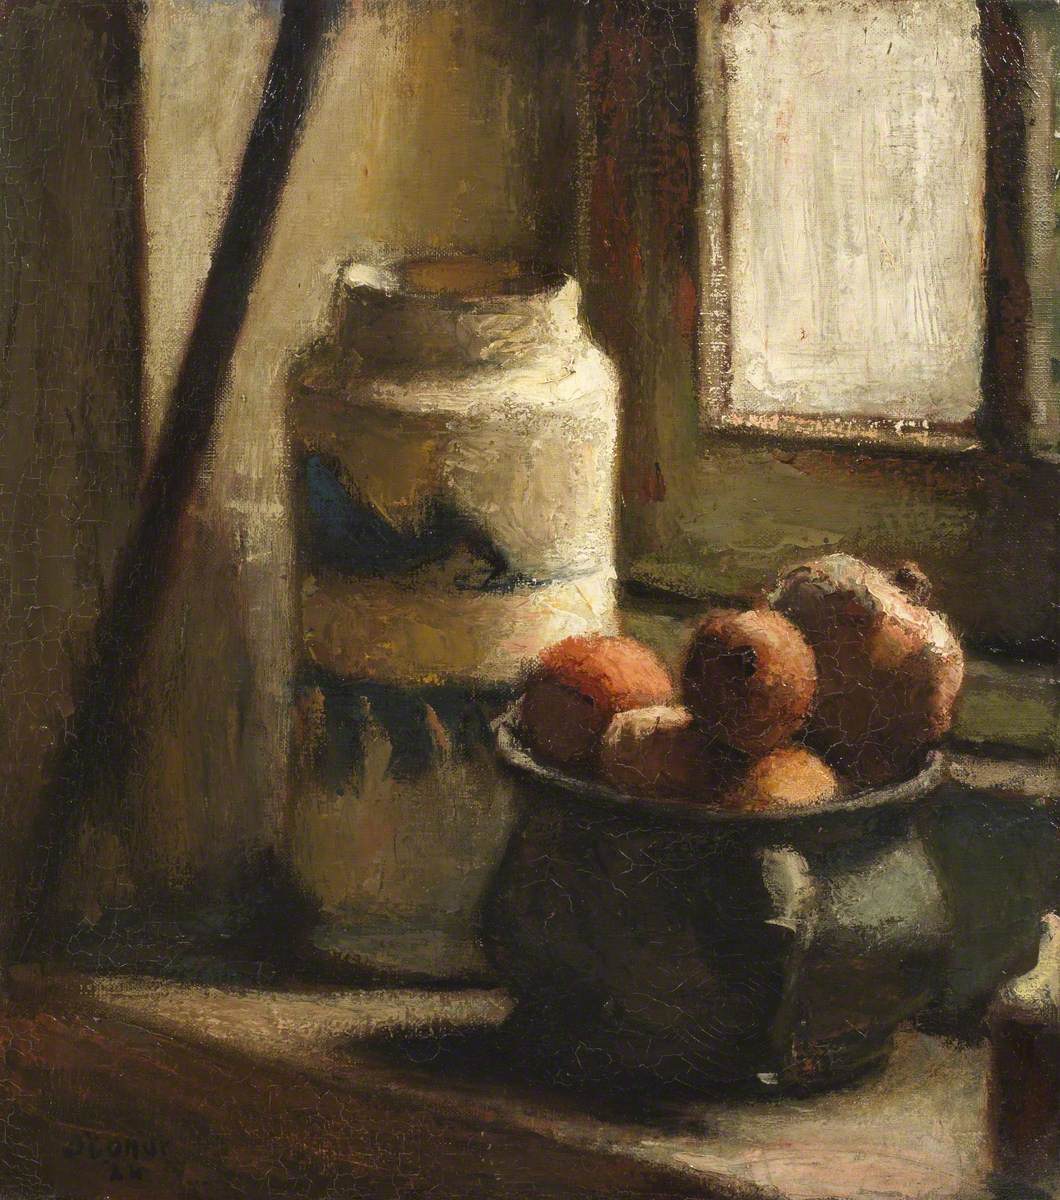 Still Life with Bowl of Fruit by a Window